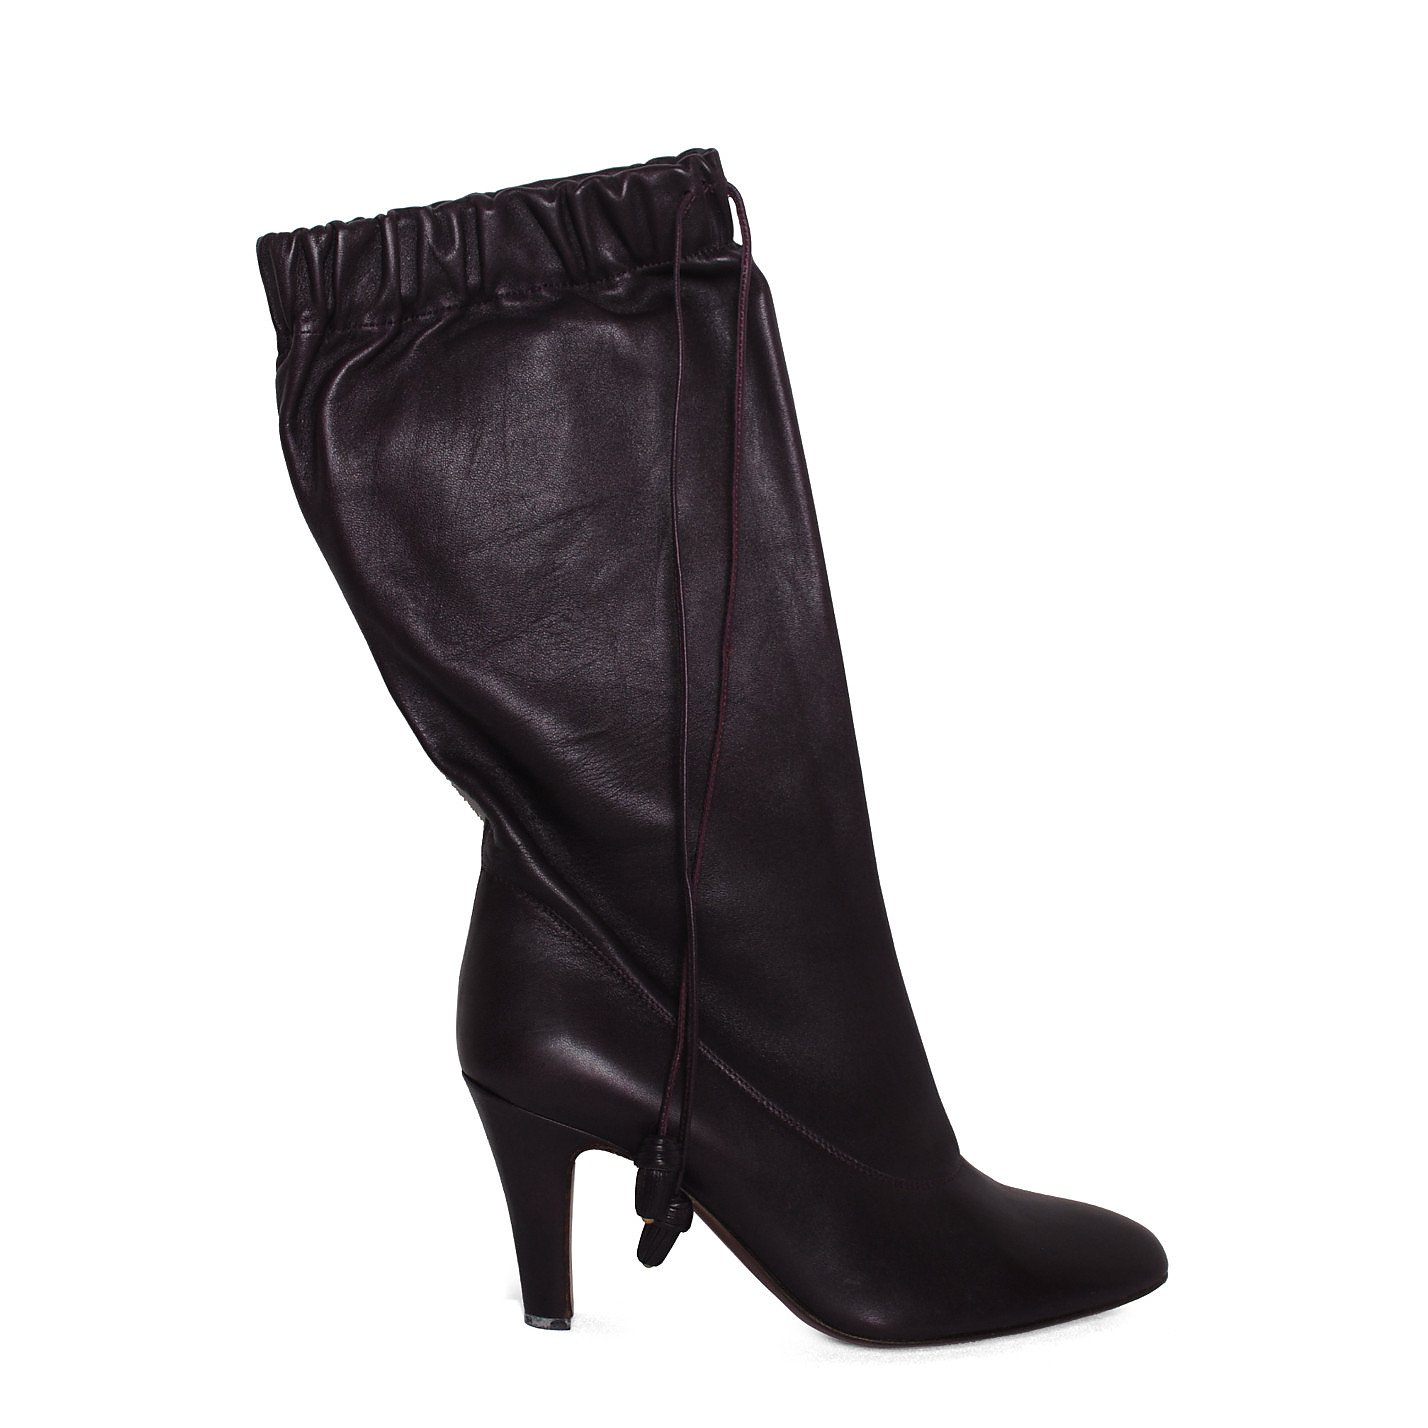 Yves Saint Laurent Leather Heeled Drawstring Boots